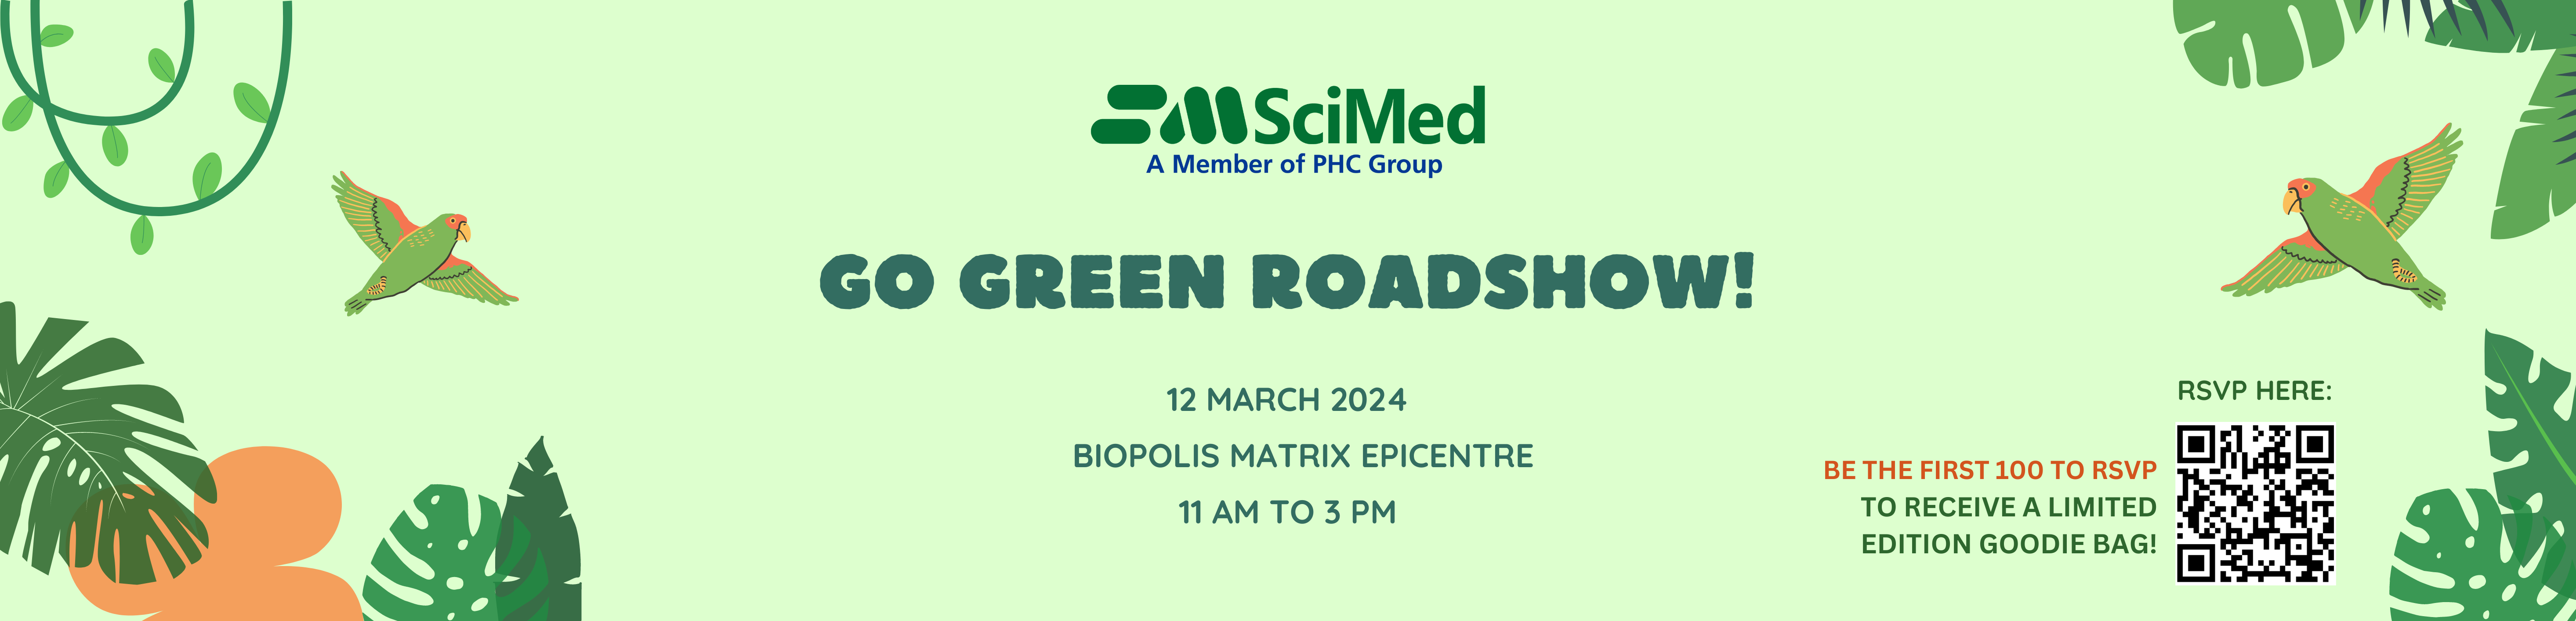 Come and Join our SciMed’s Go Green Roadshow!